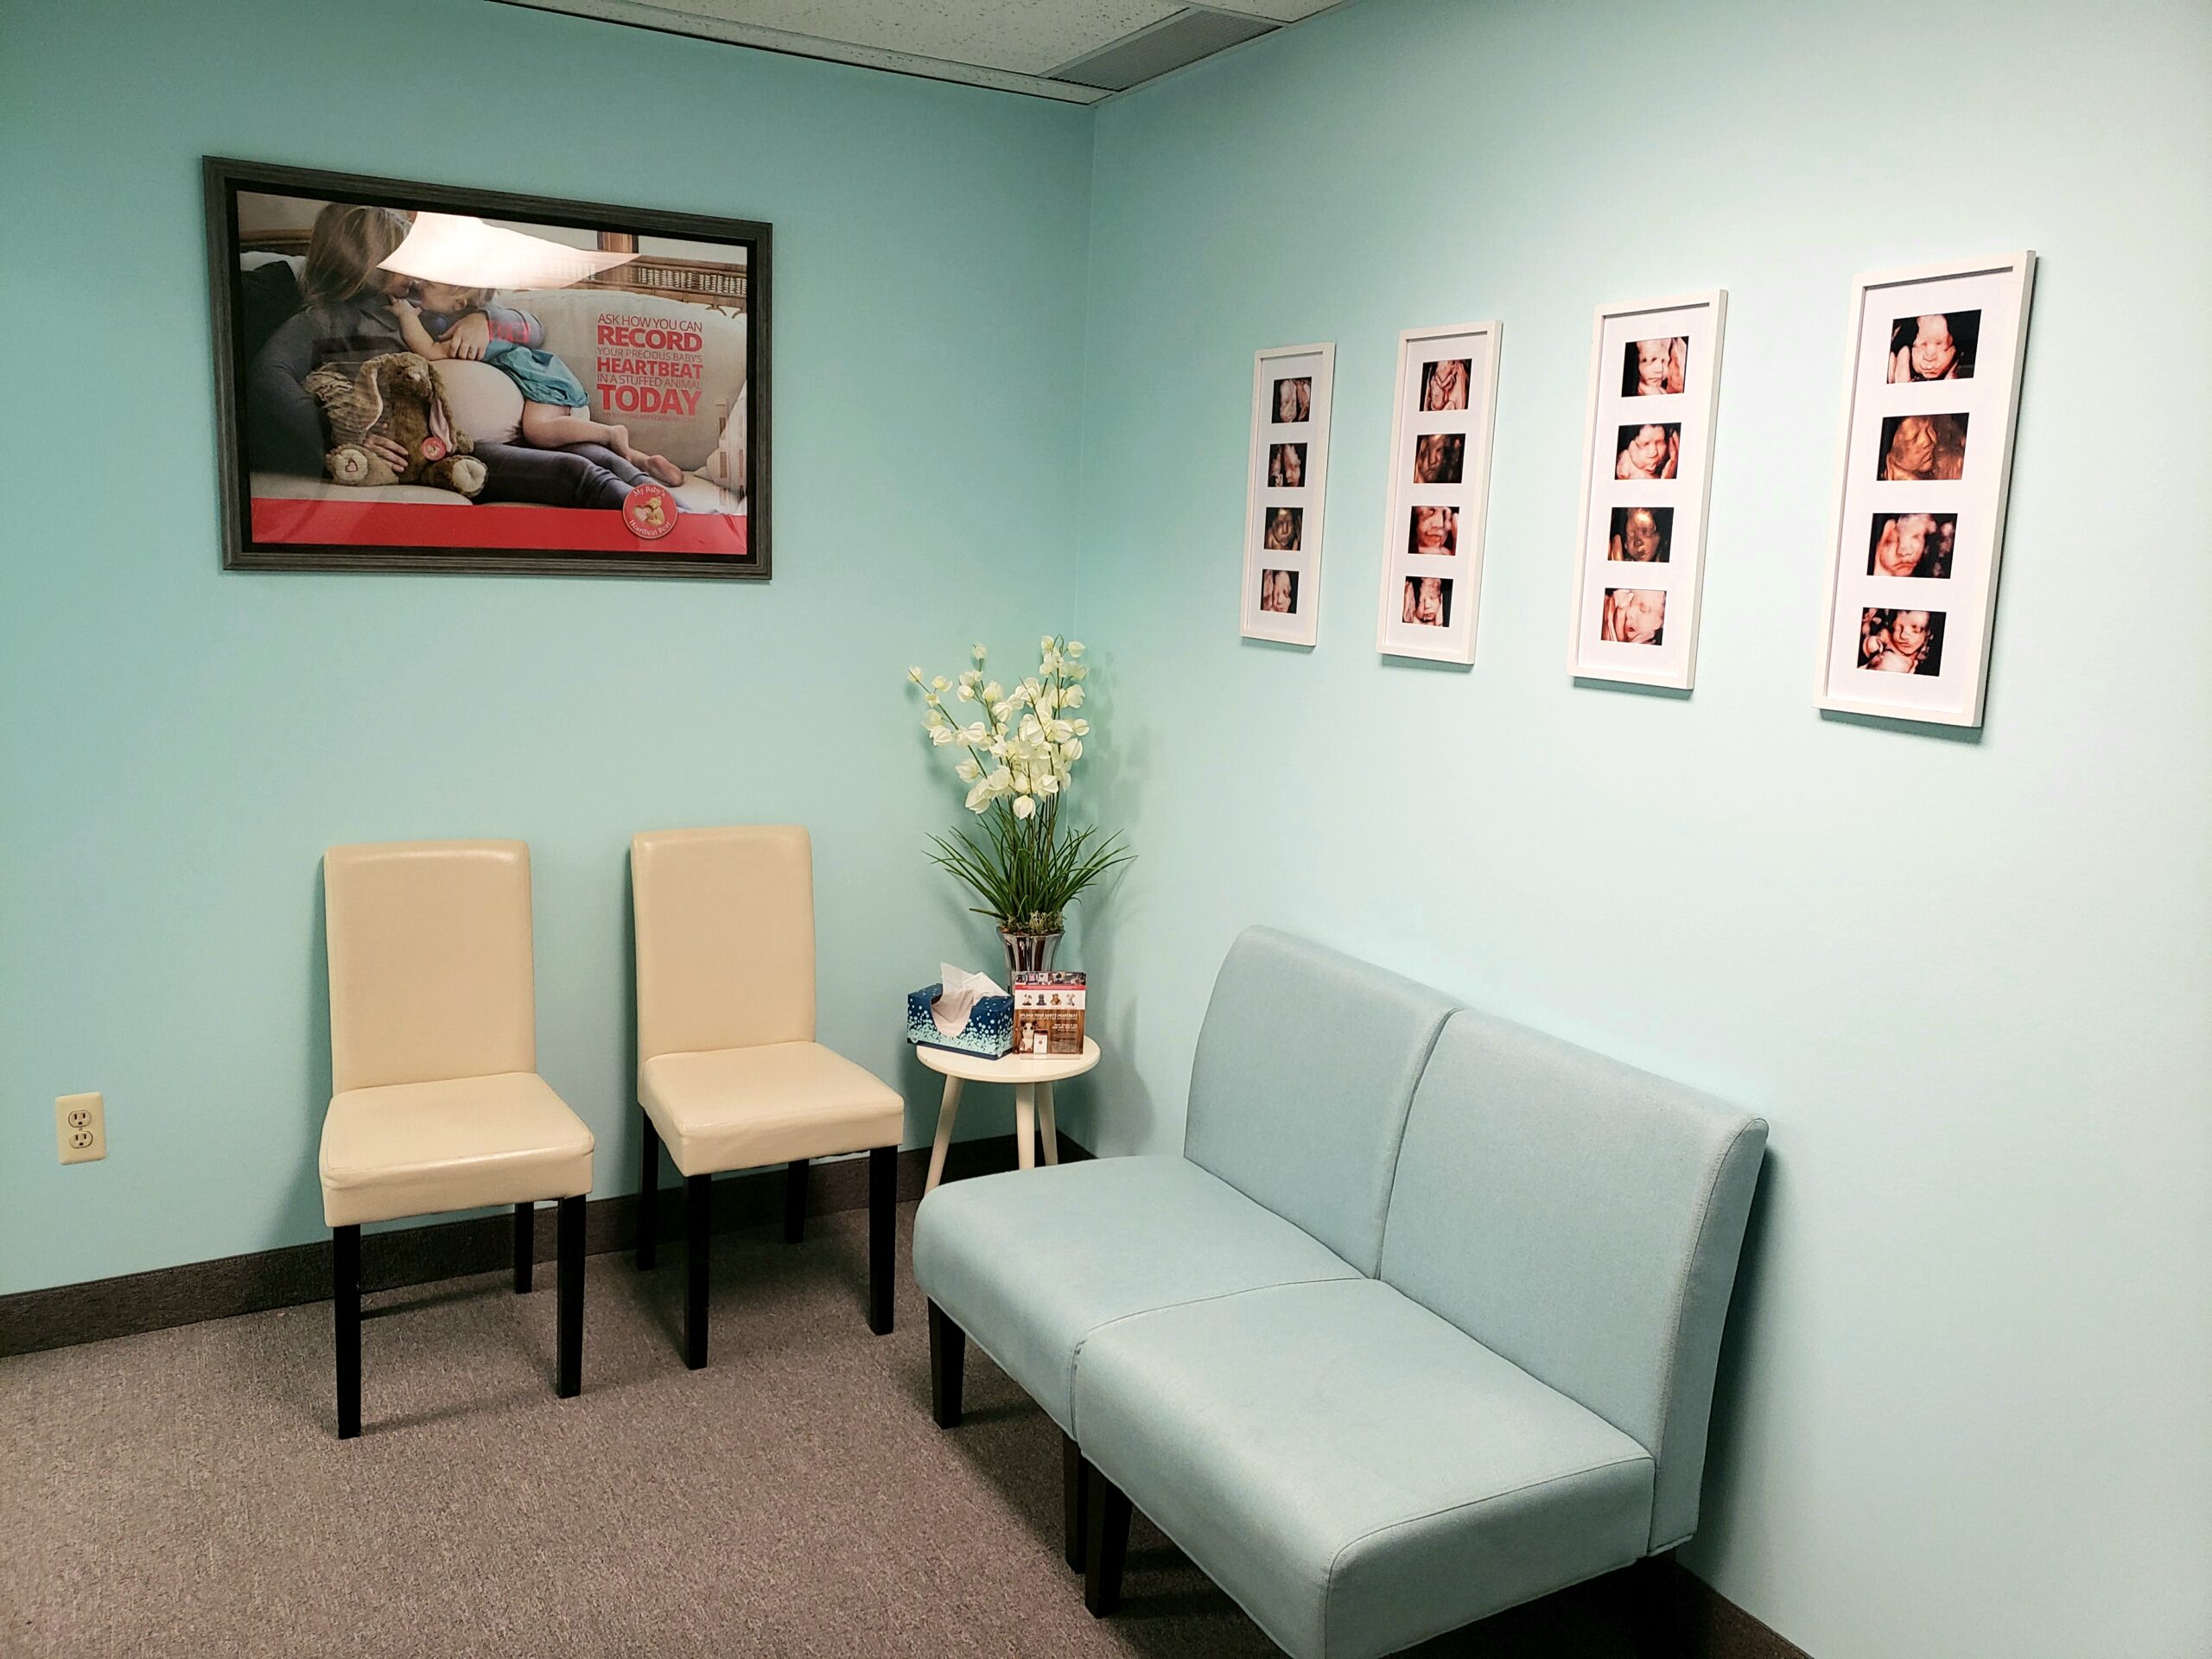 Our waiting area for 3d ultrasound appointments